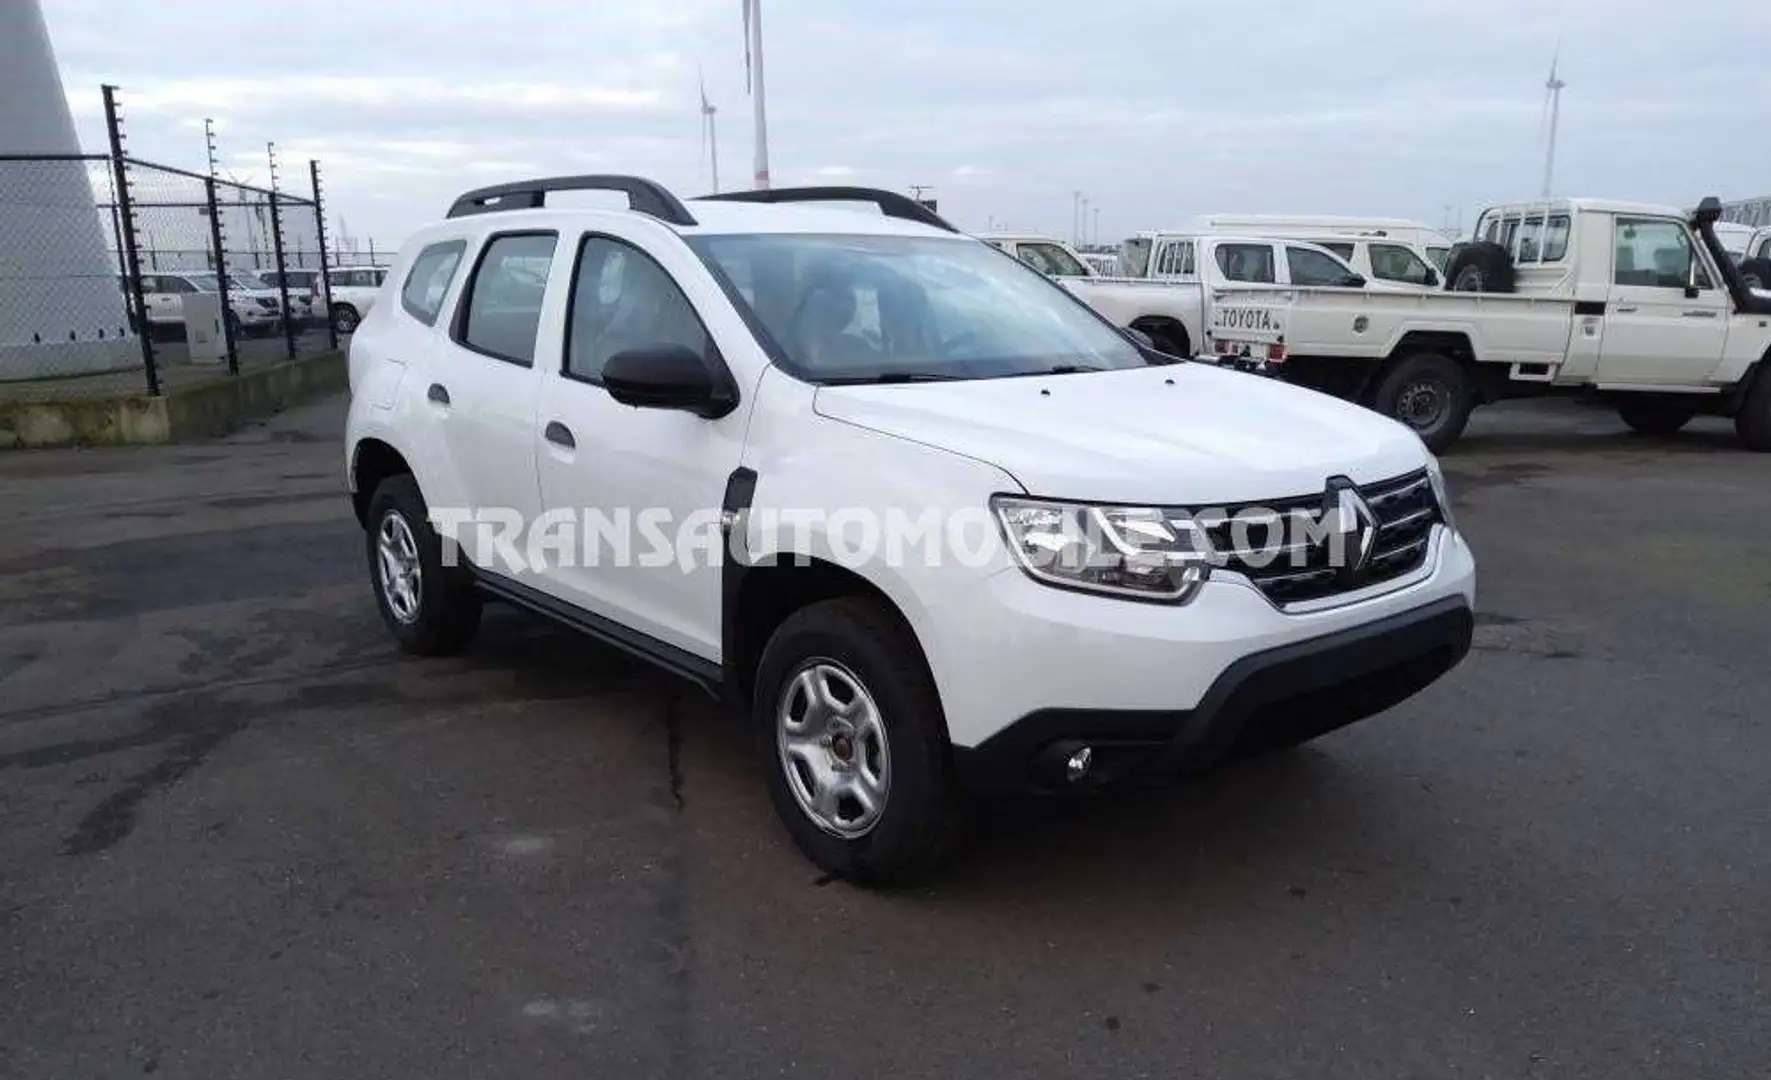 Renault Duster Standard - EXPORT OUT EU TROPICAL VERSION - EXPORT Wit - 1